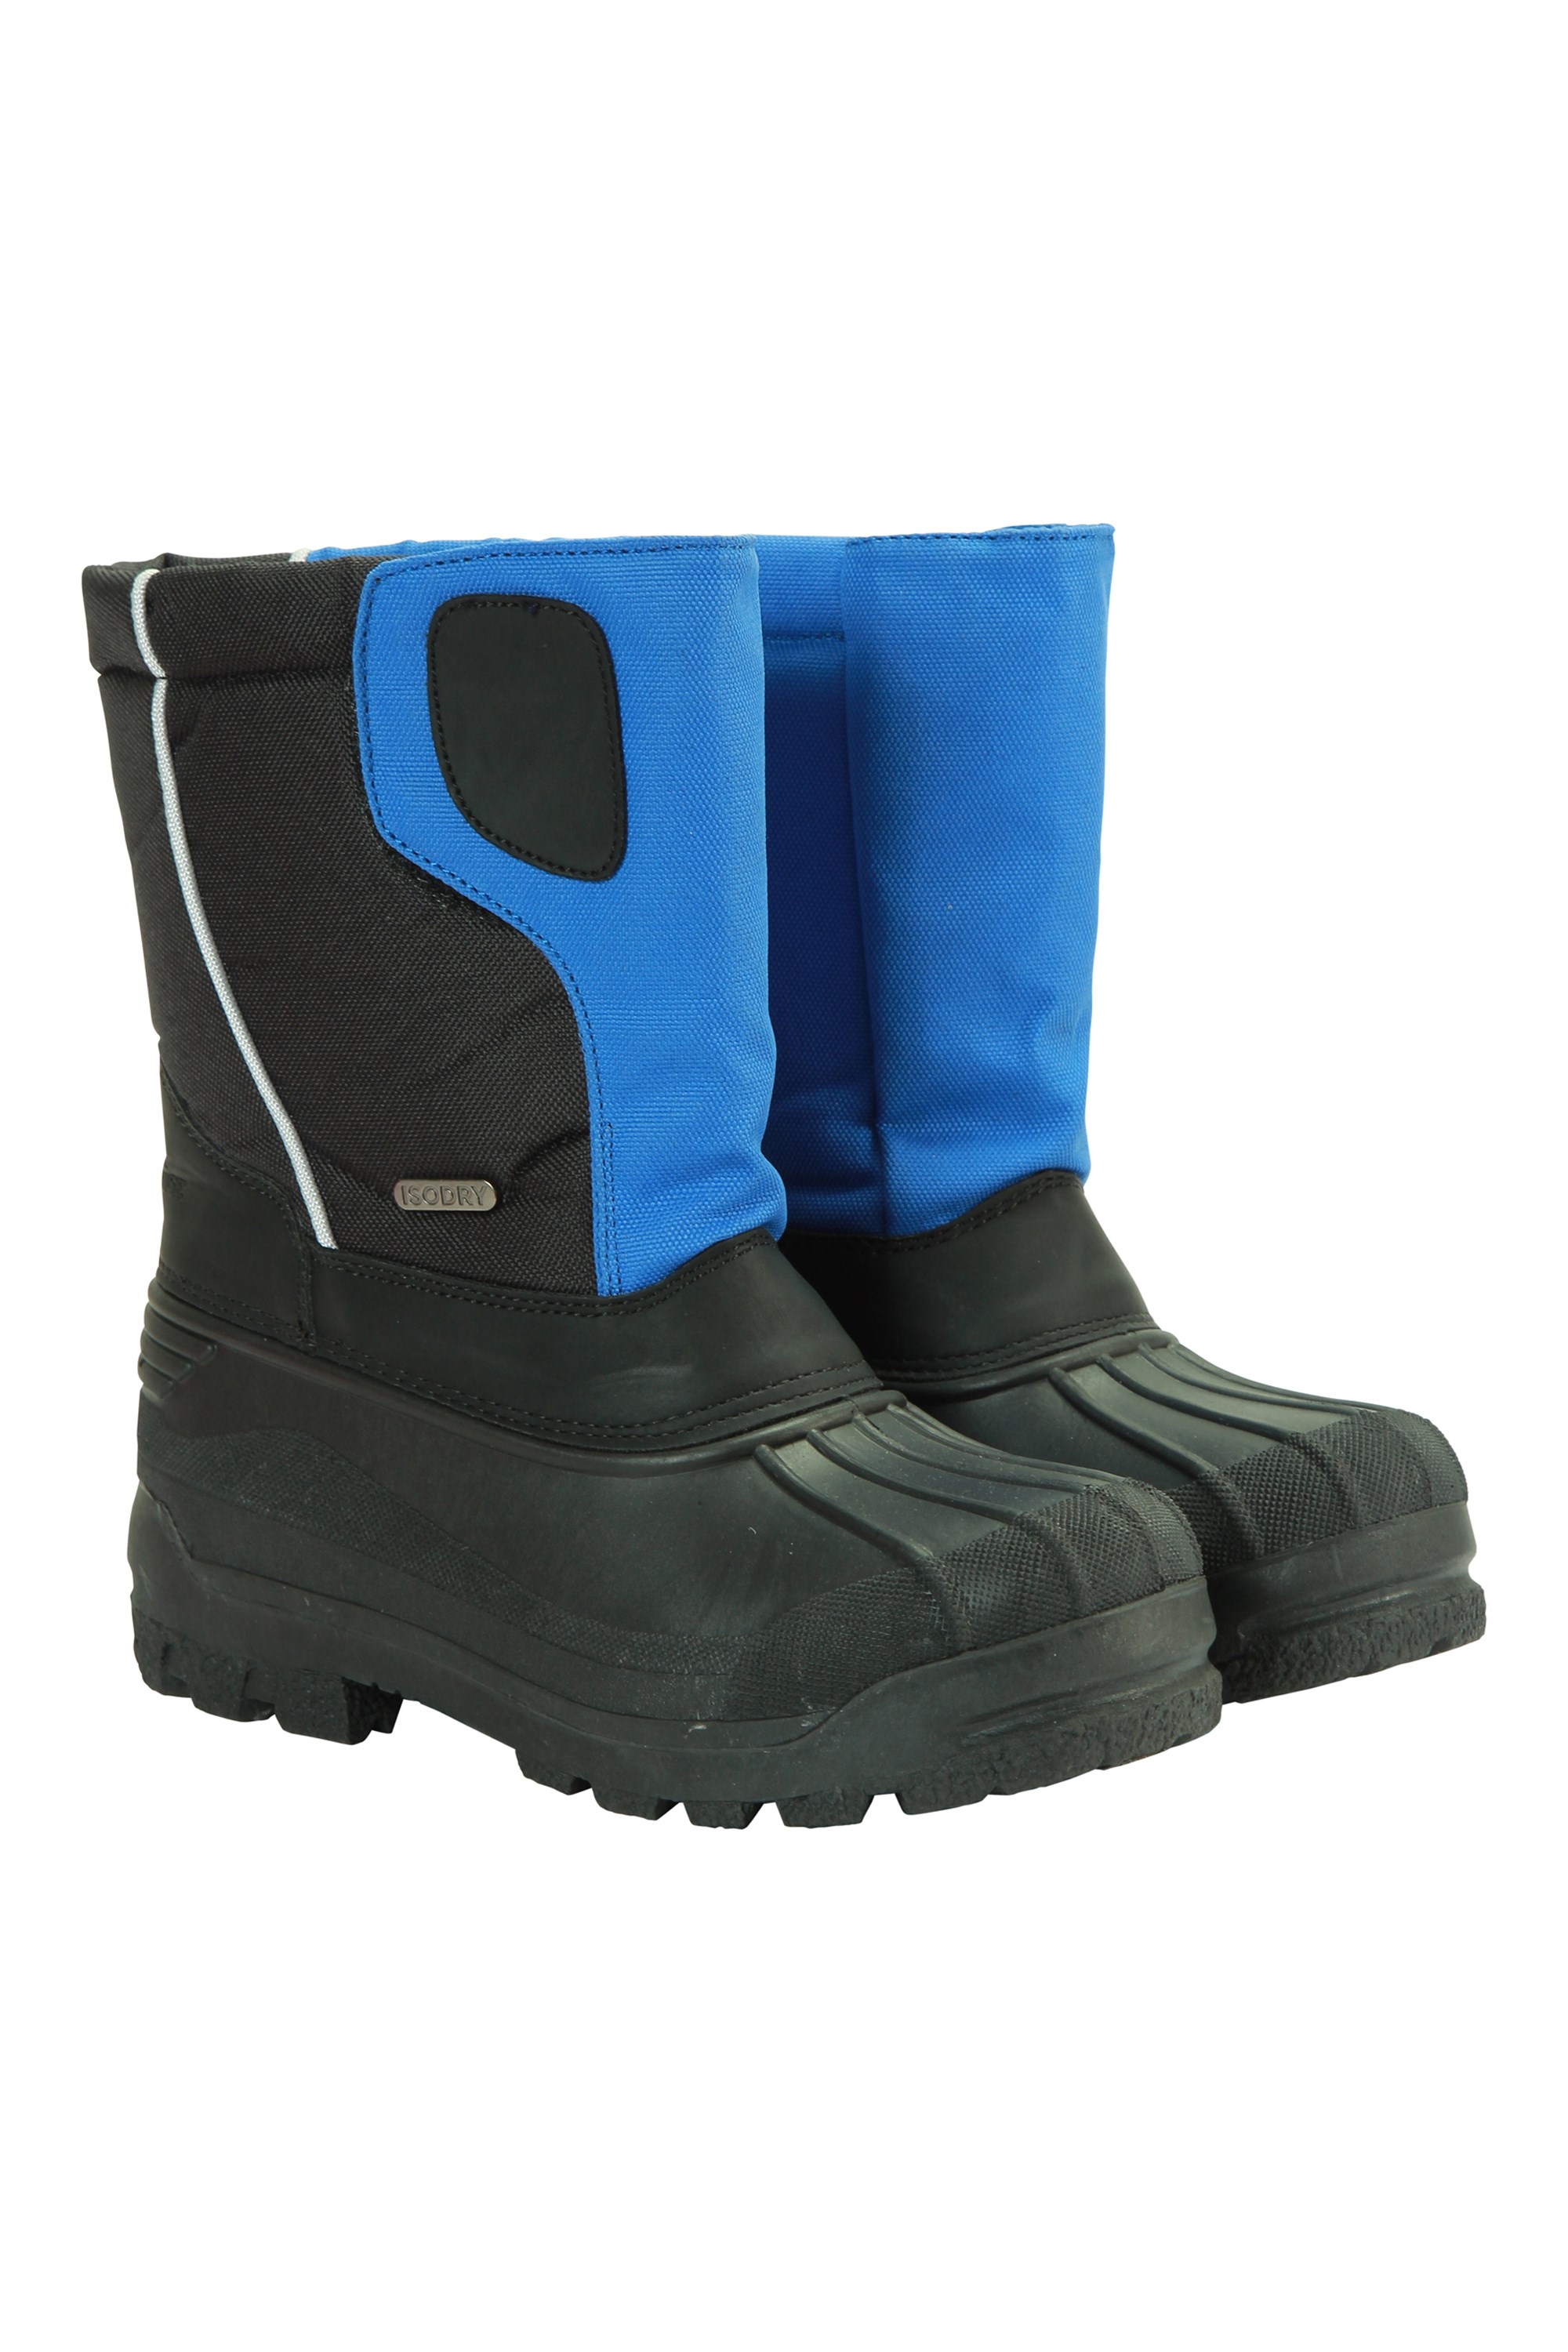 Mountain Warehouse Apex Kids Thinsulate Snow Boots Blue